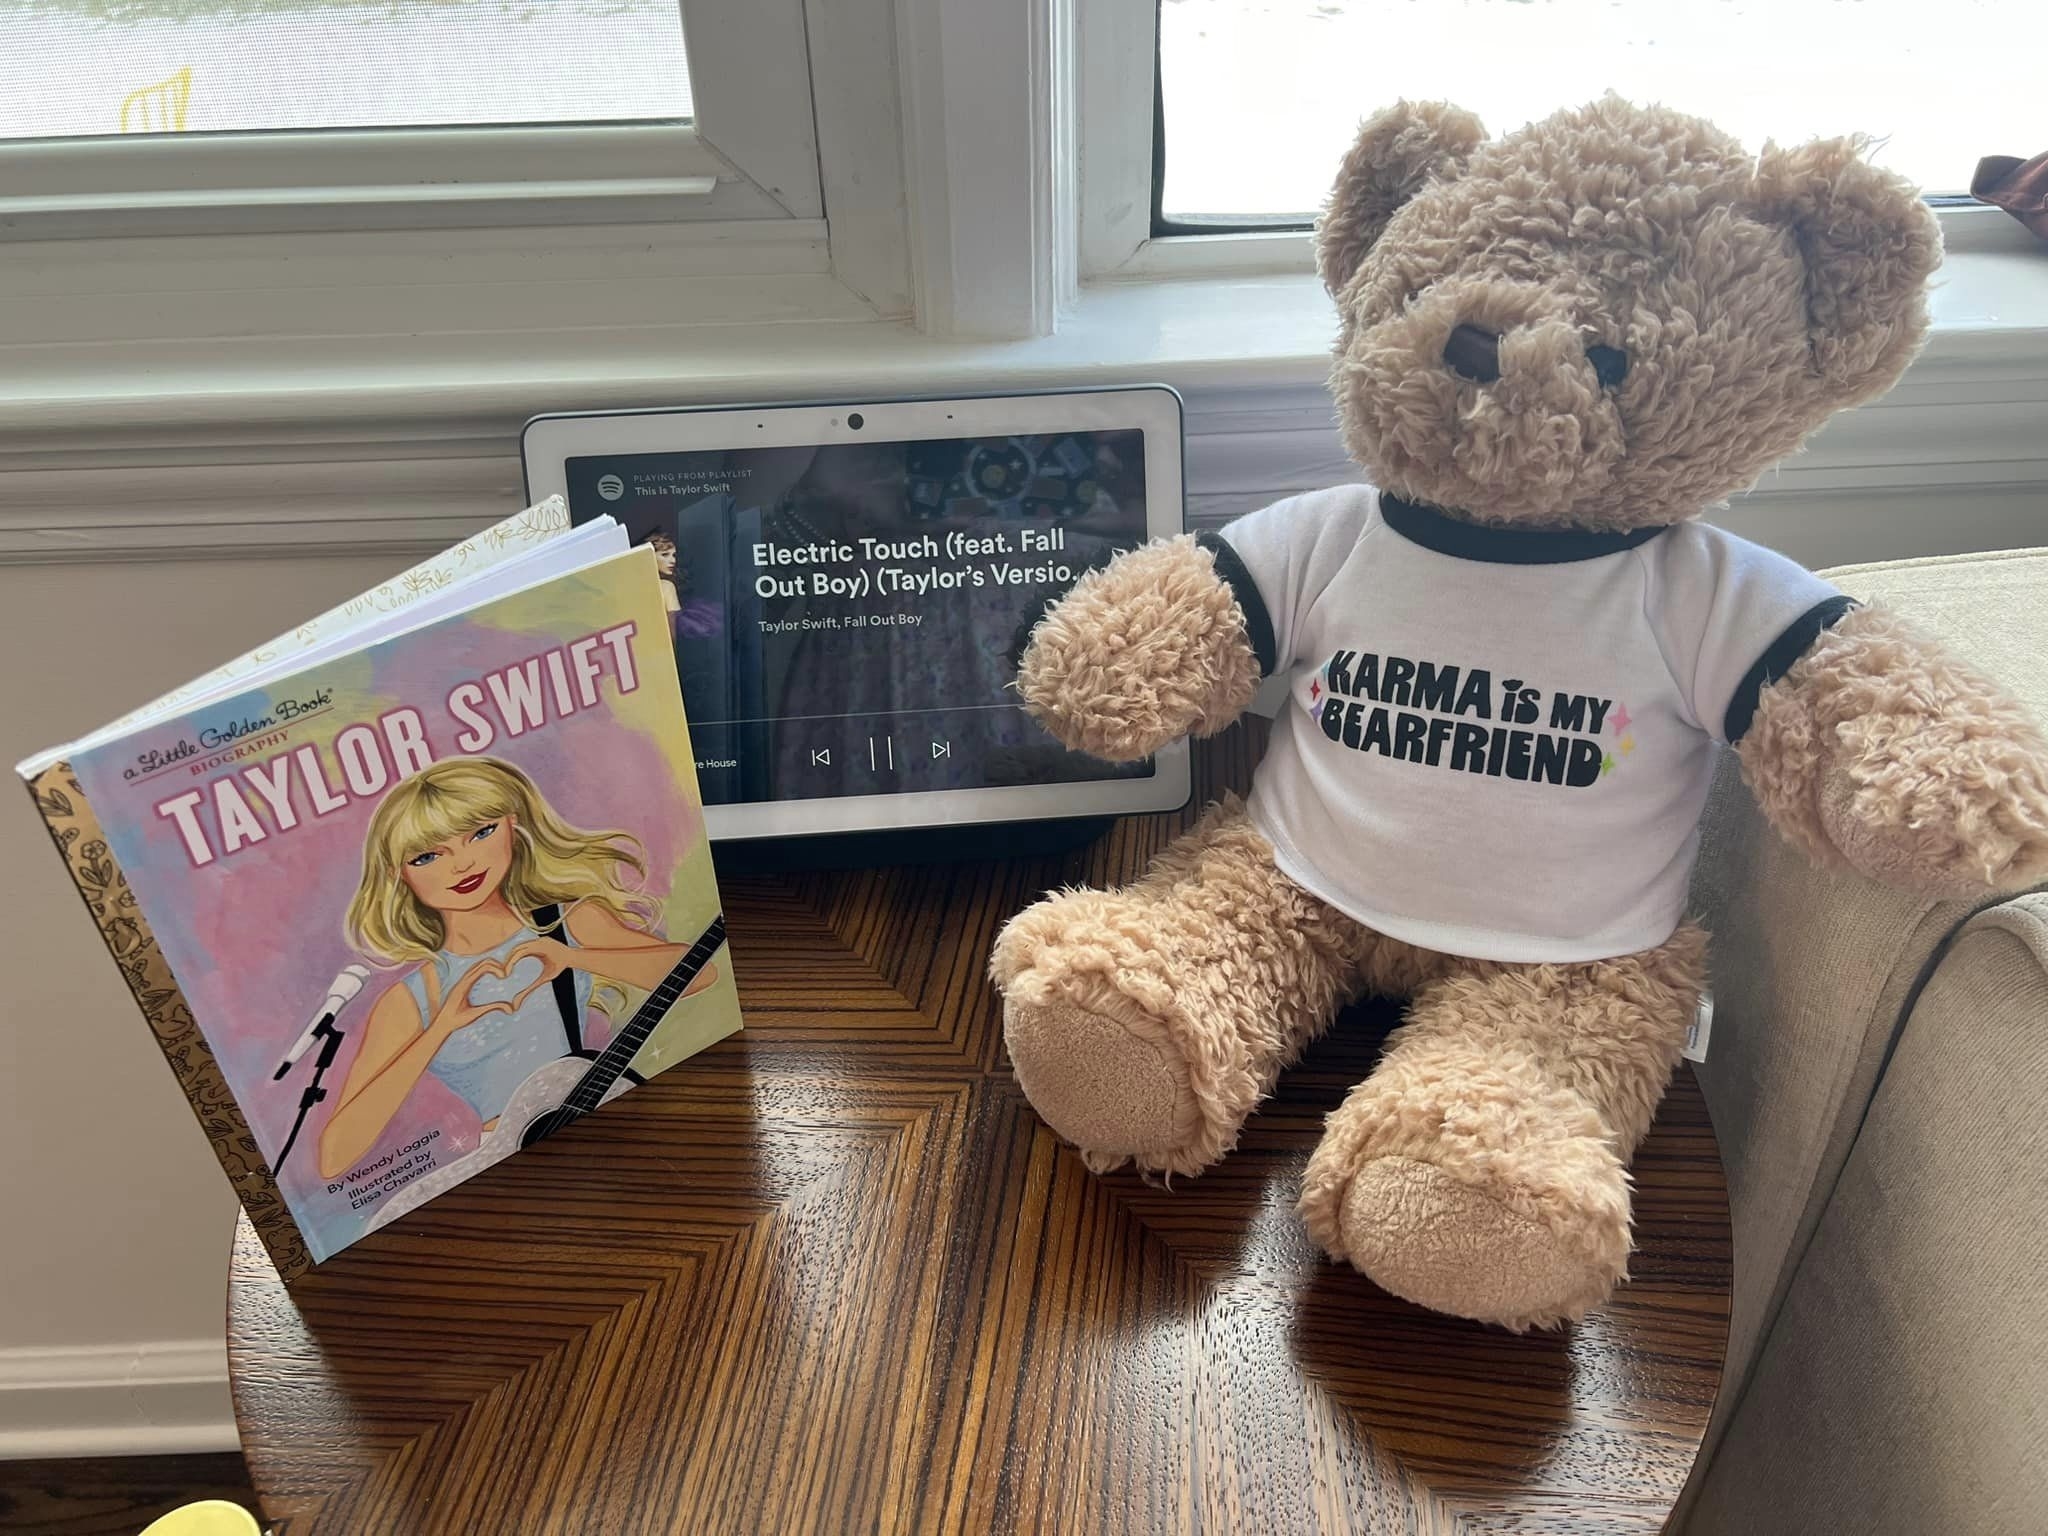 A Taylor Swift little golden book, a tablet playing “Electric Touch”, and a teddy bear in a “KARMA IS MY BOYFRIEND” shirt